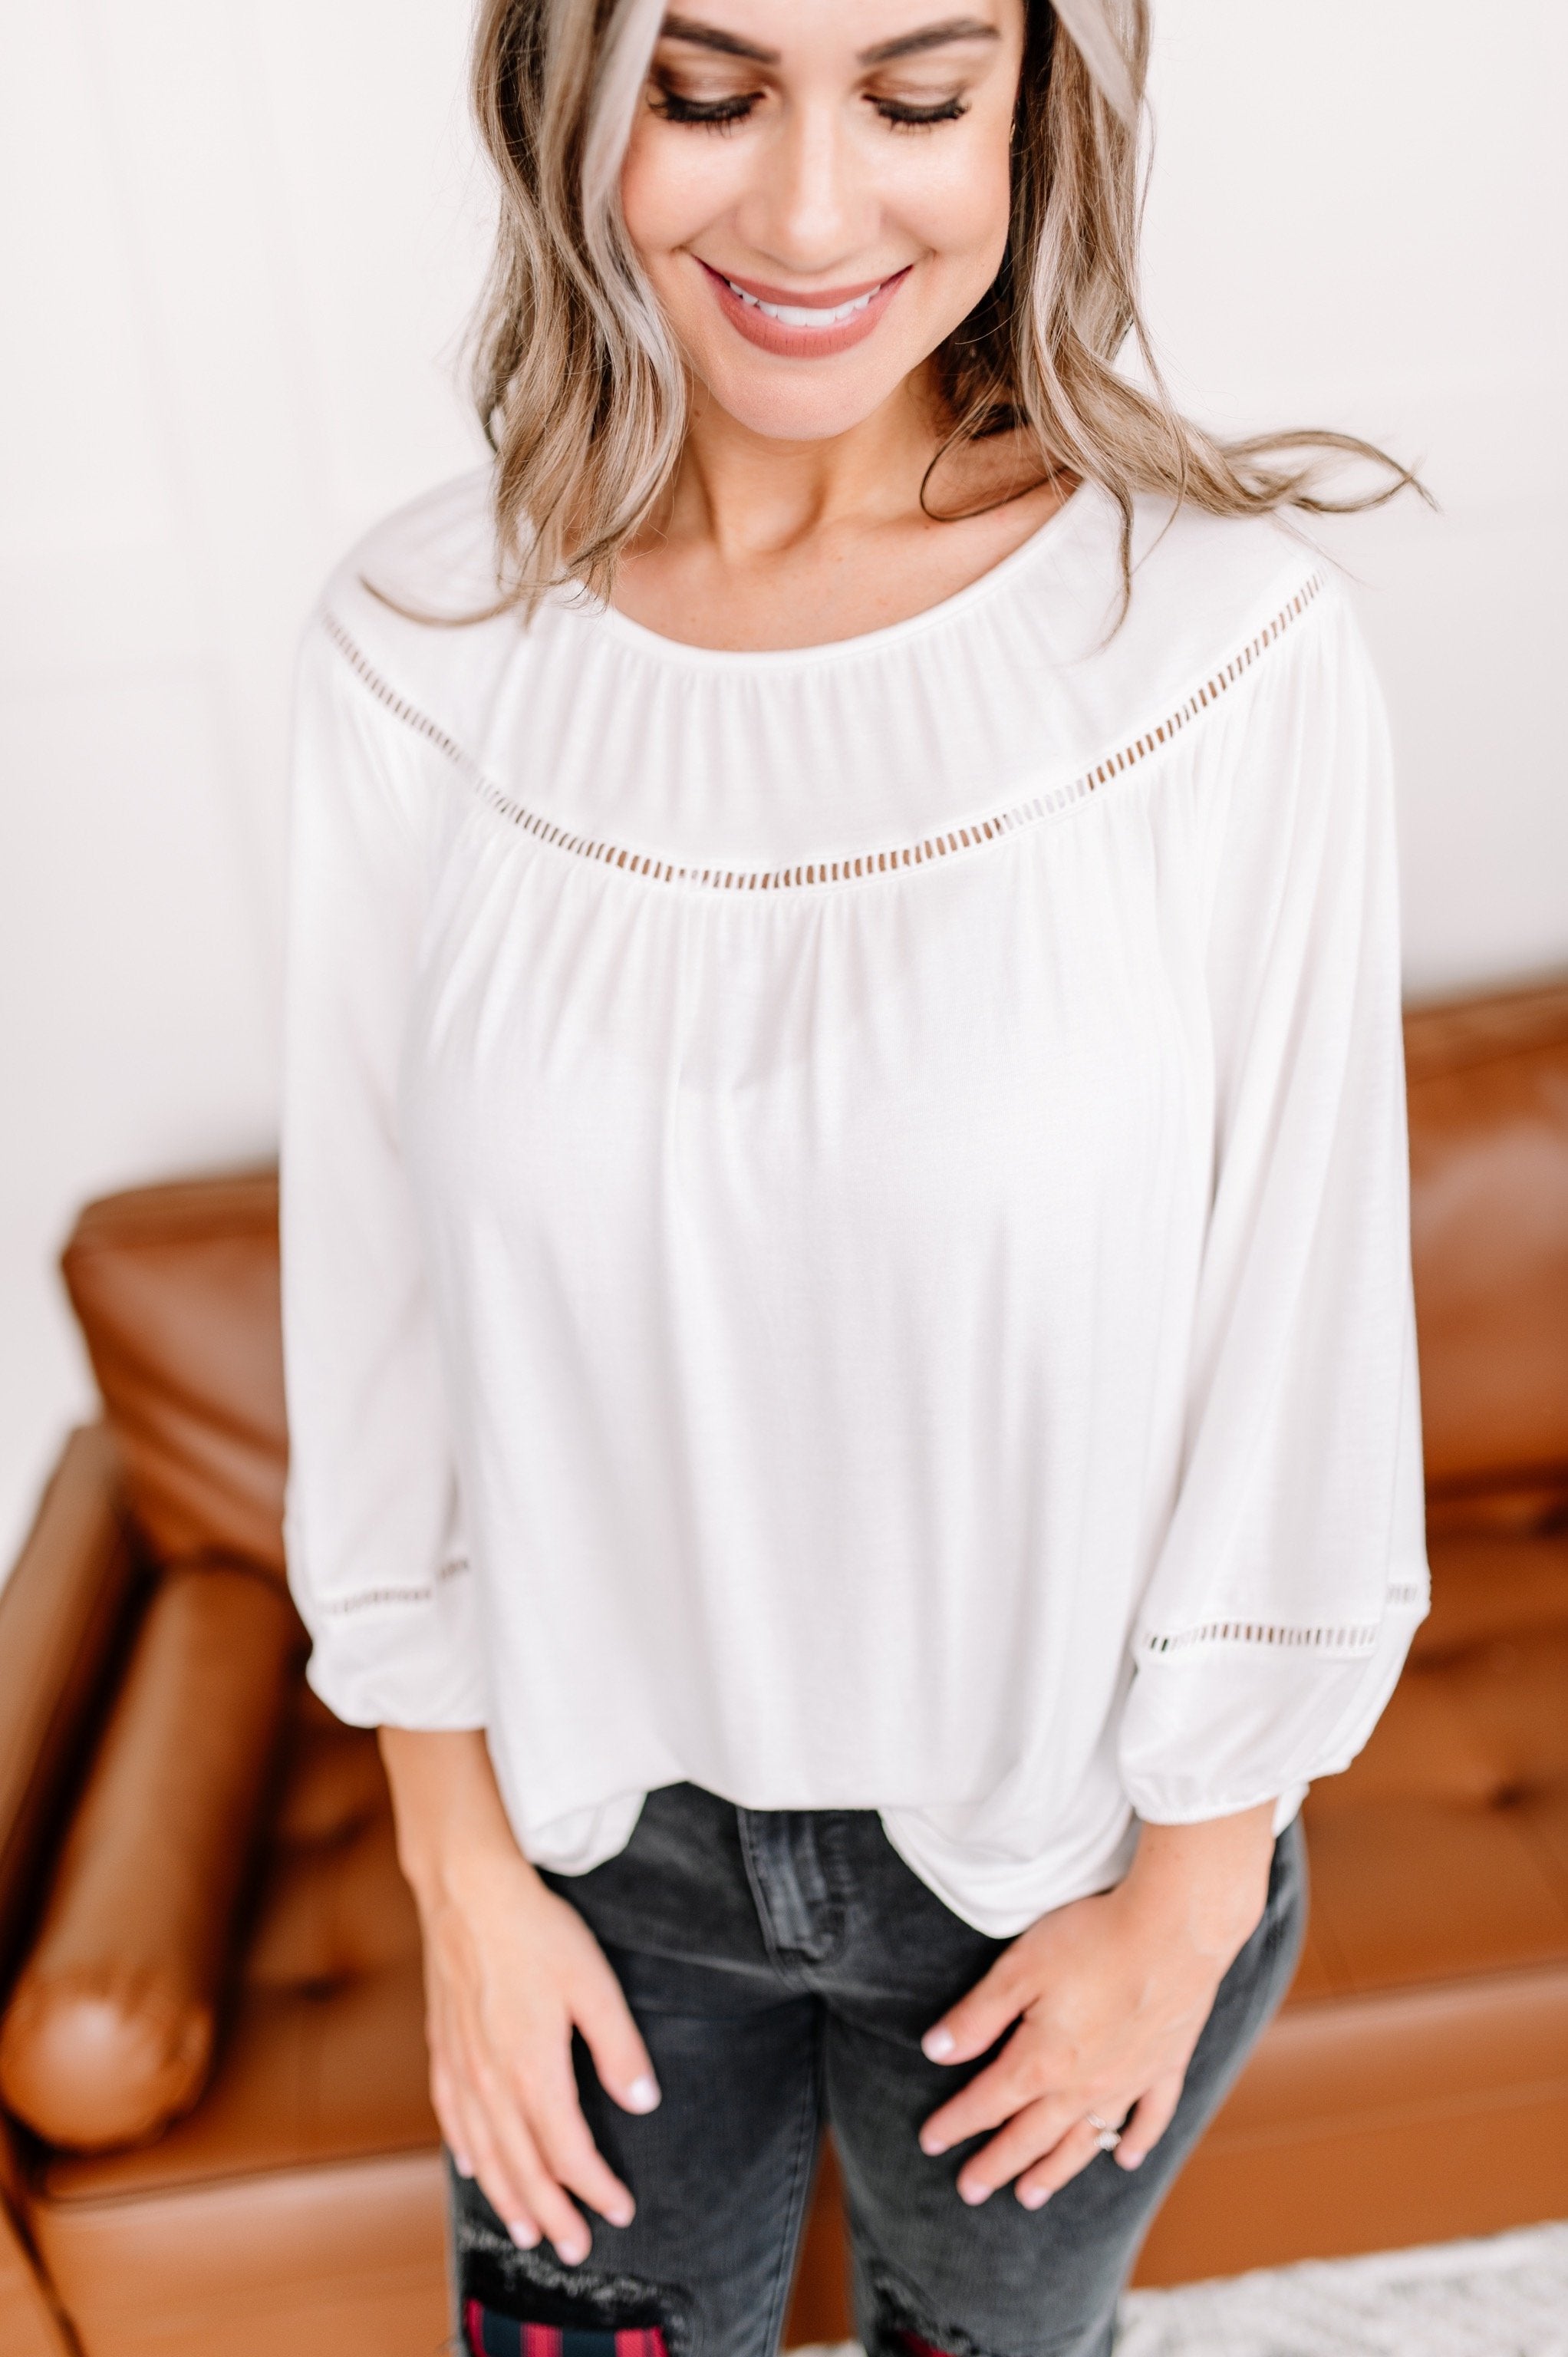 Looking Brilliant Top In Bright White